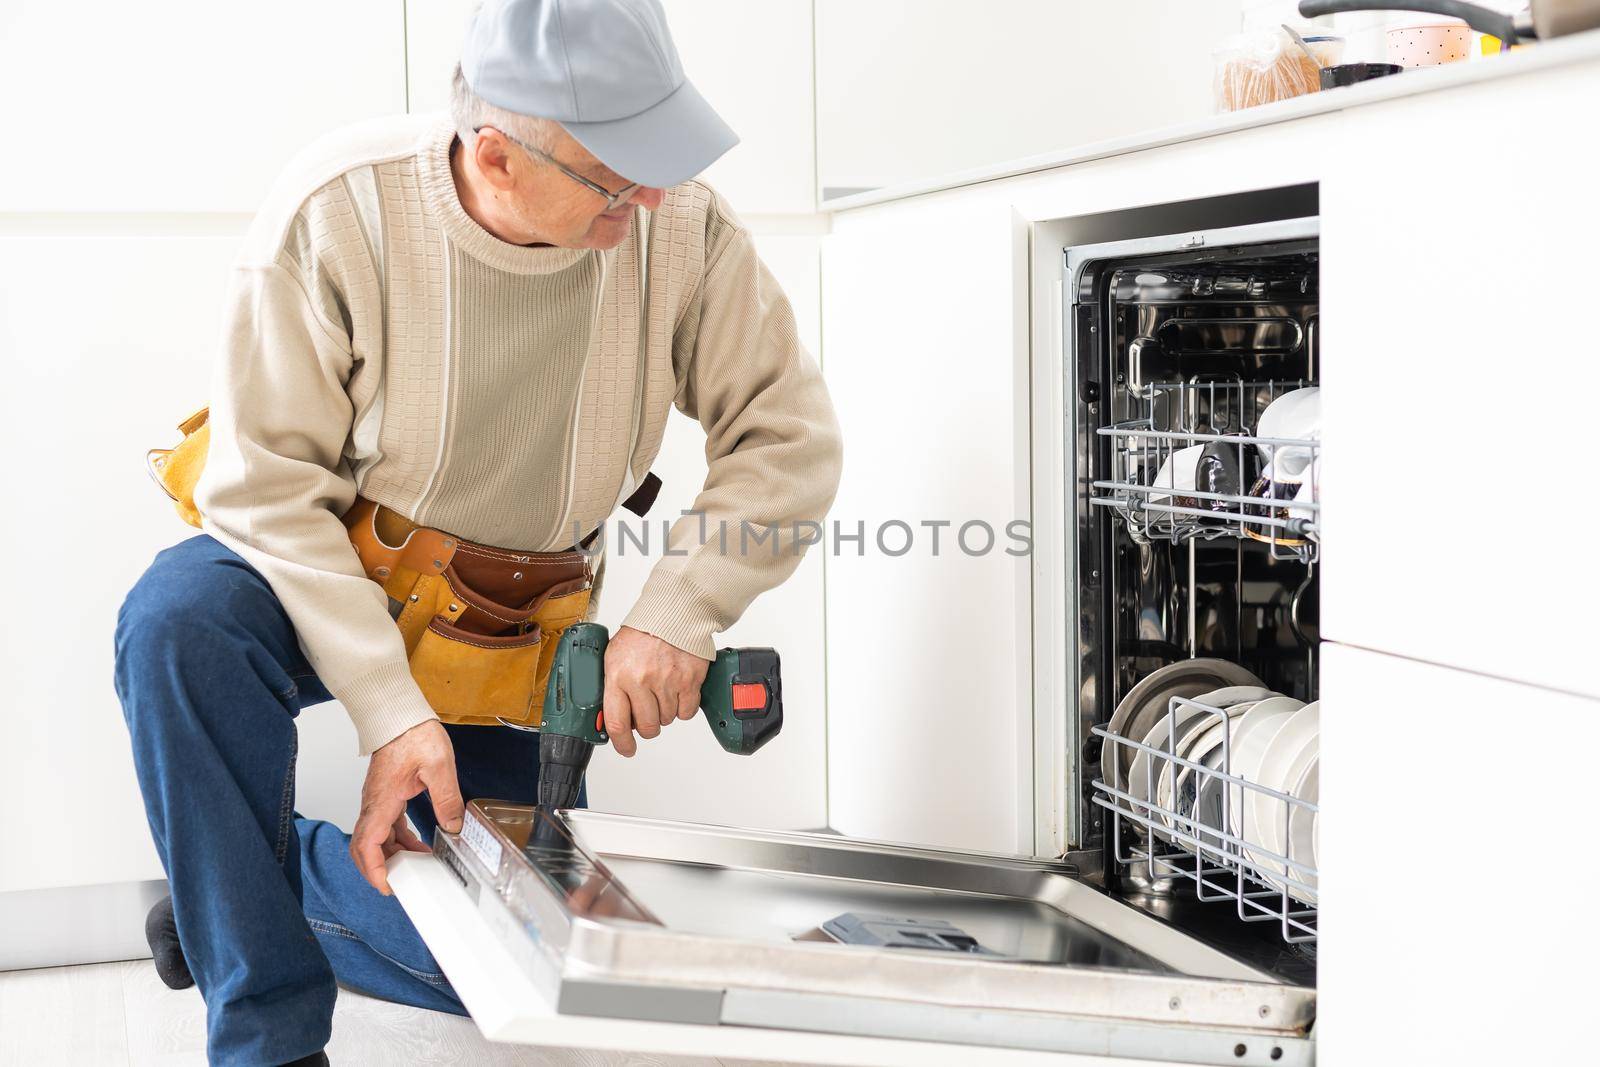 Technician or plumber repairing the dishwasher in a household by Andelov13